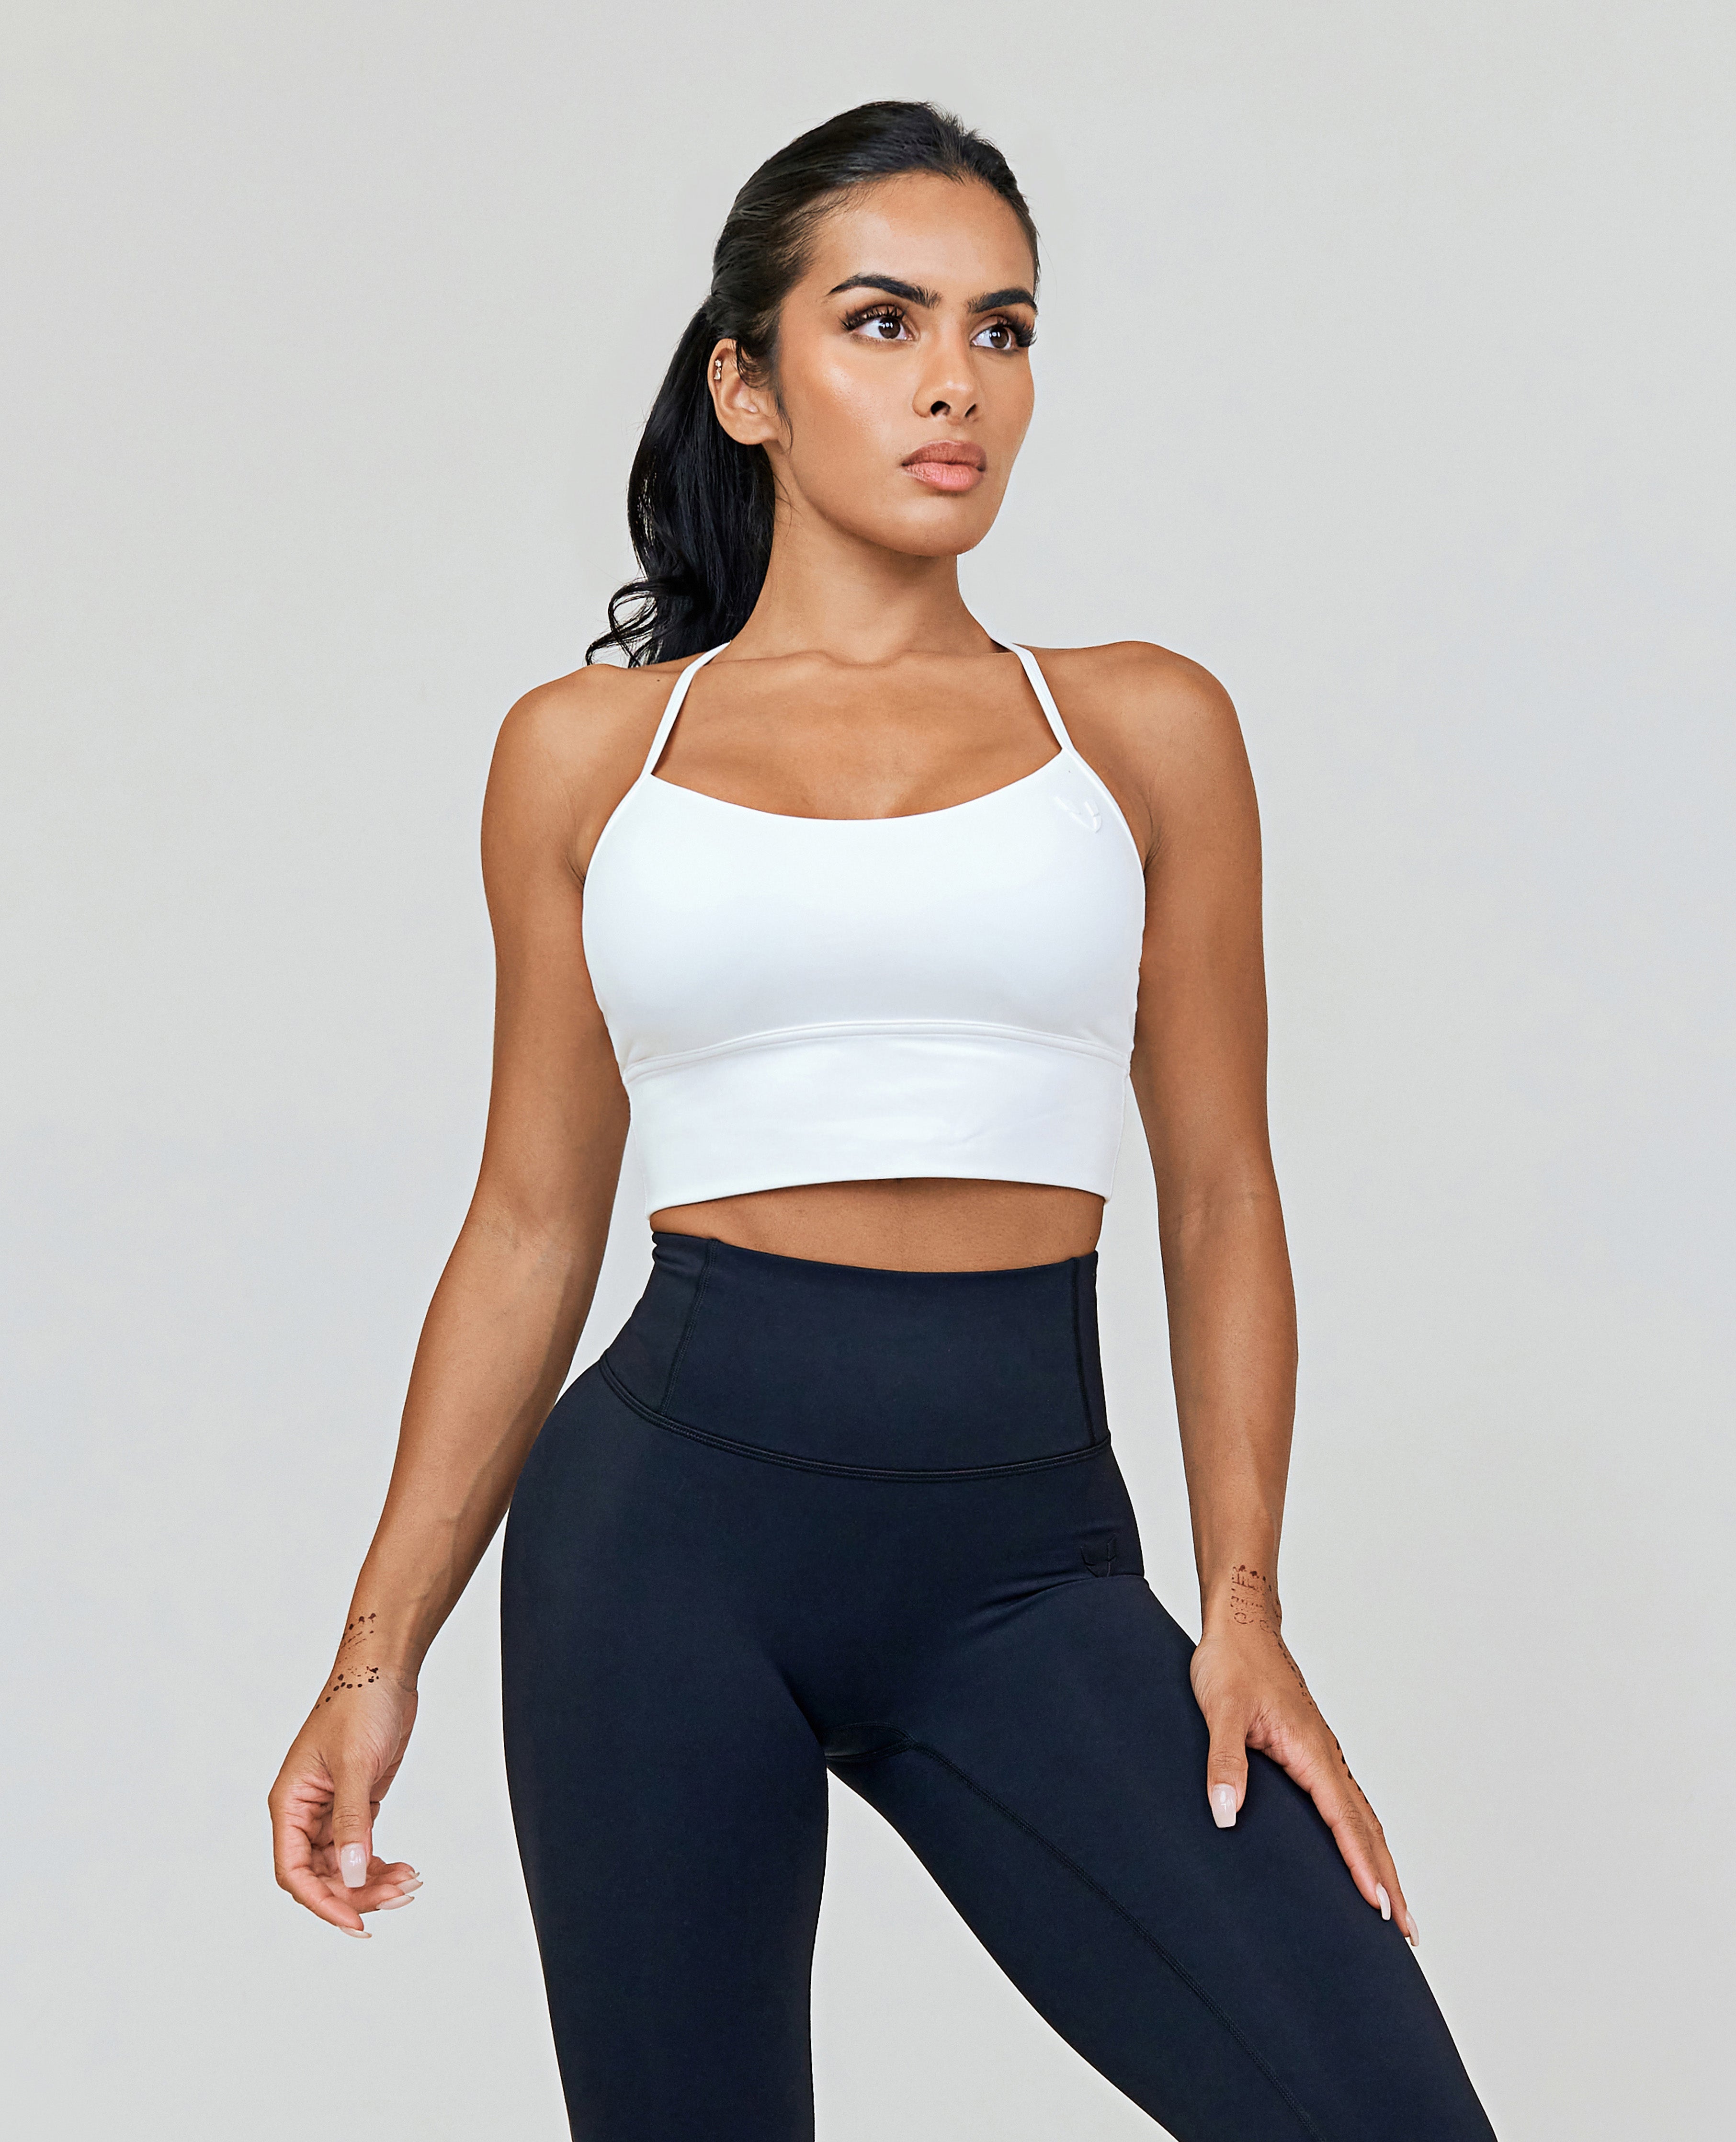 I went to a new gym in booty scrunch leggings & just a sports bra